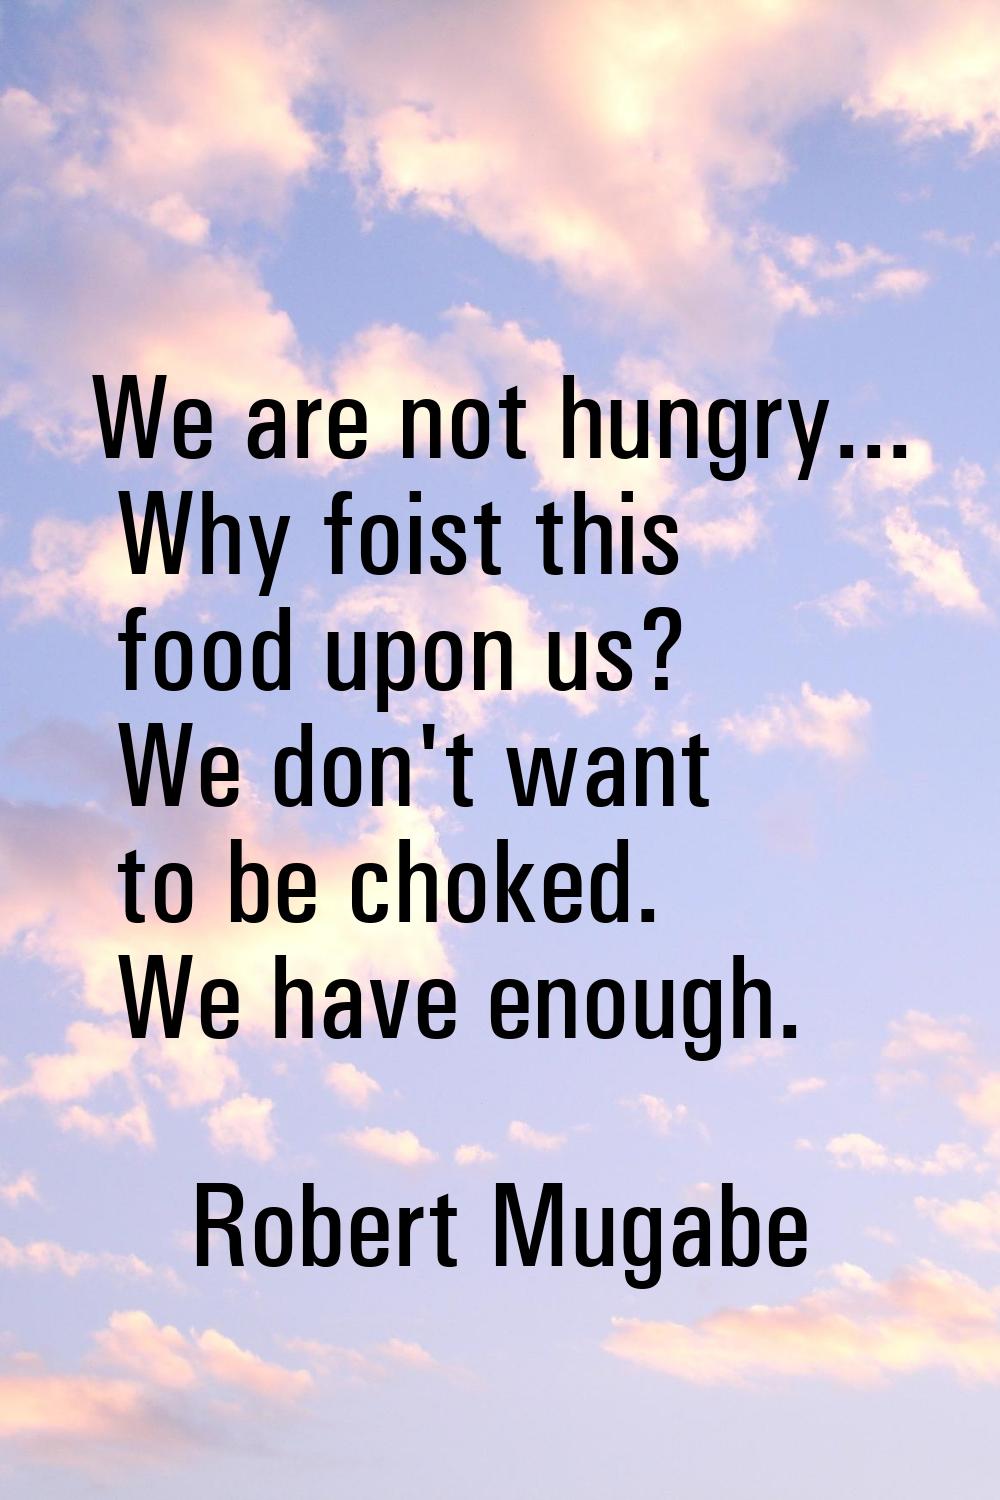 We are not hungry... Why foist this food upon us? We don't want to be choked. We have enough.